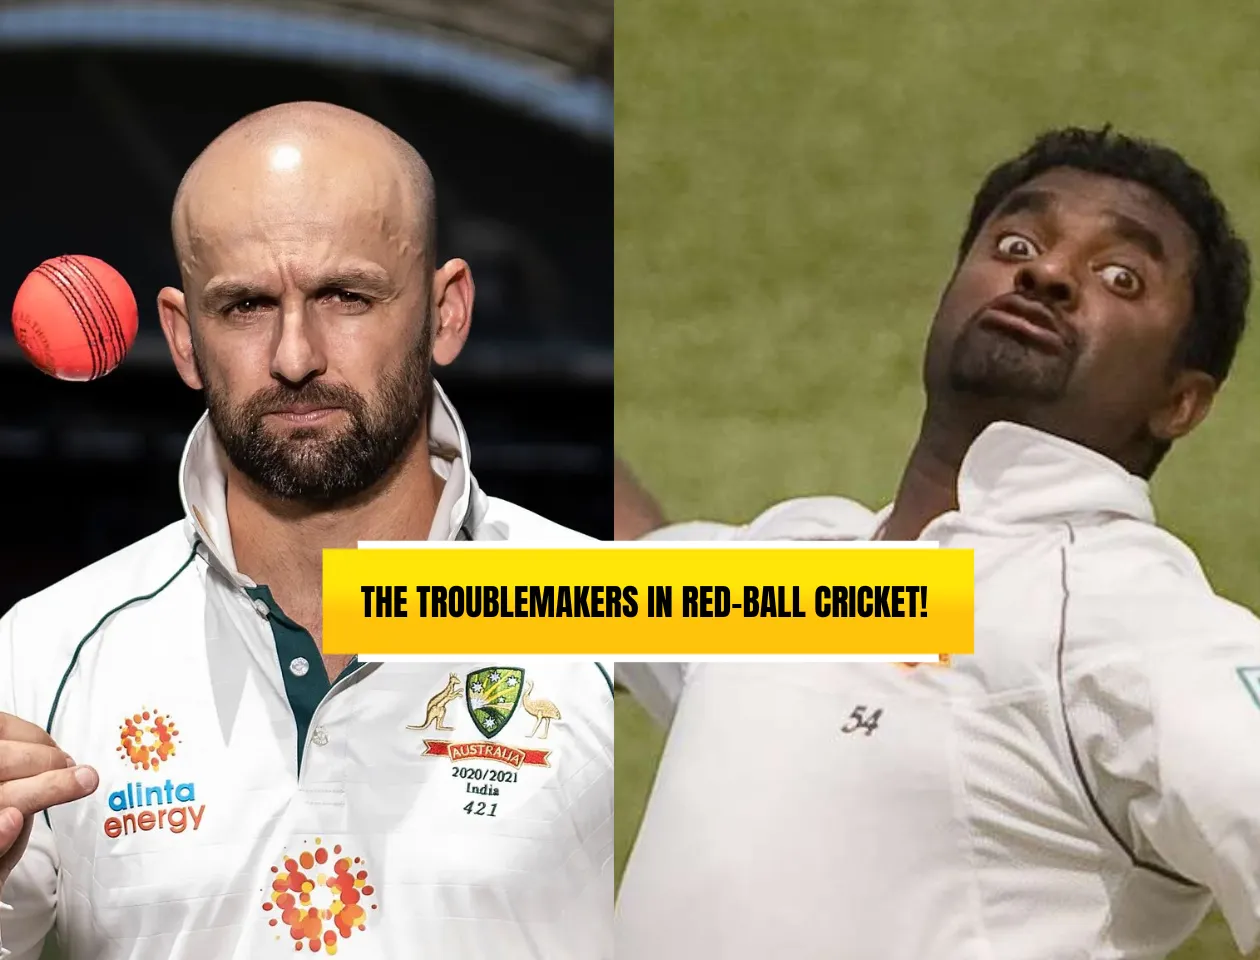 8 bowlers to take 500+ wickets in Test cricket